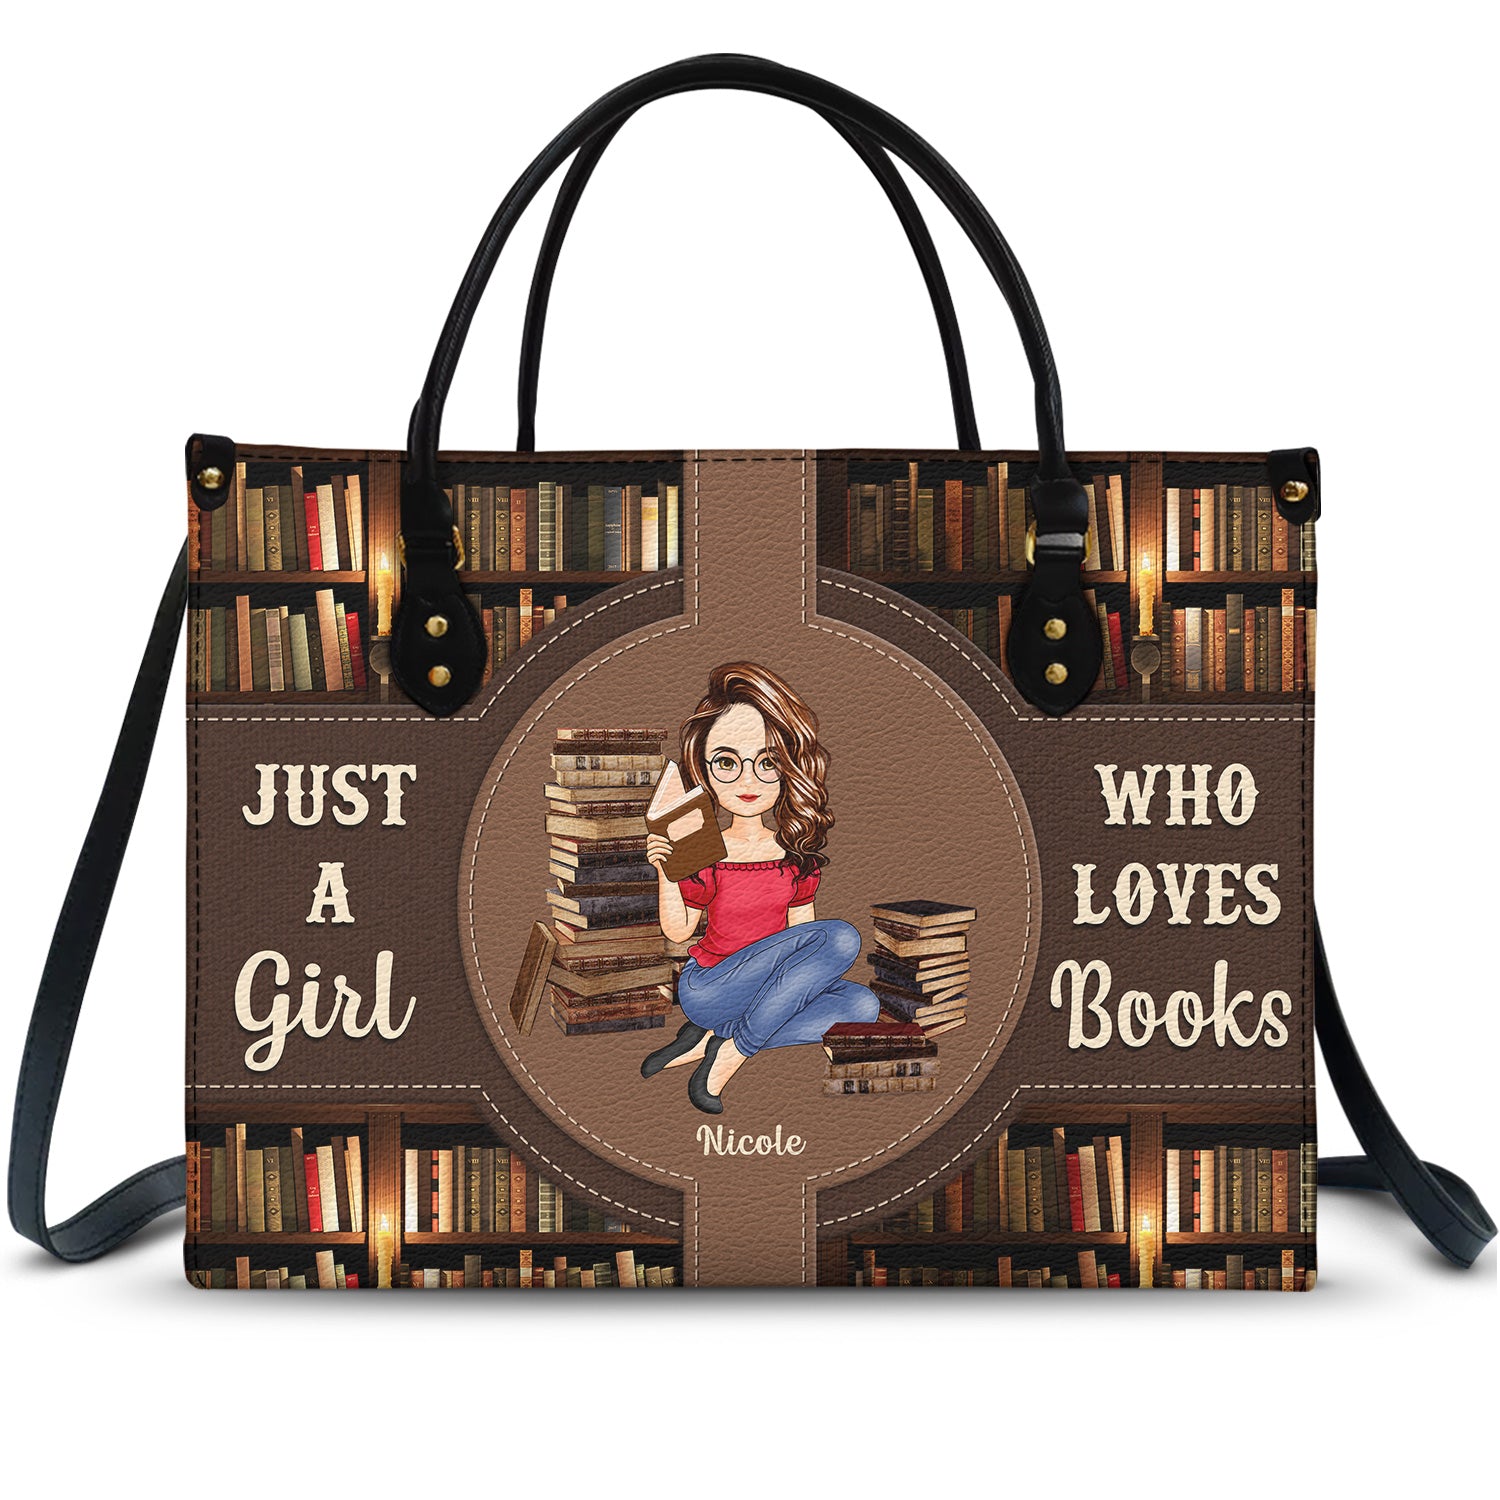 Just A Girl Who Loves Books - Gift For Reading Lovers - Personalized Leather Bag